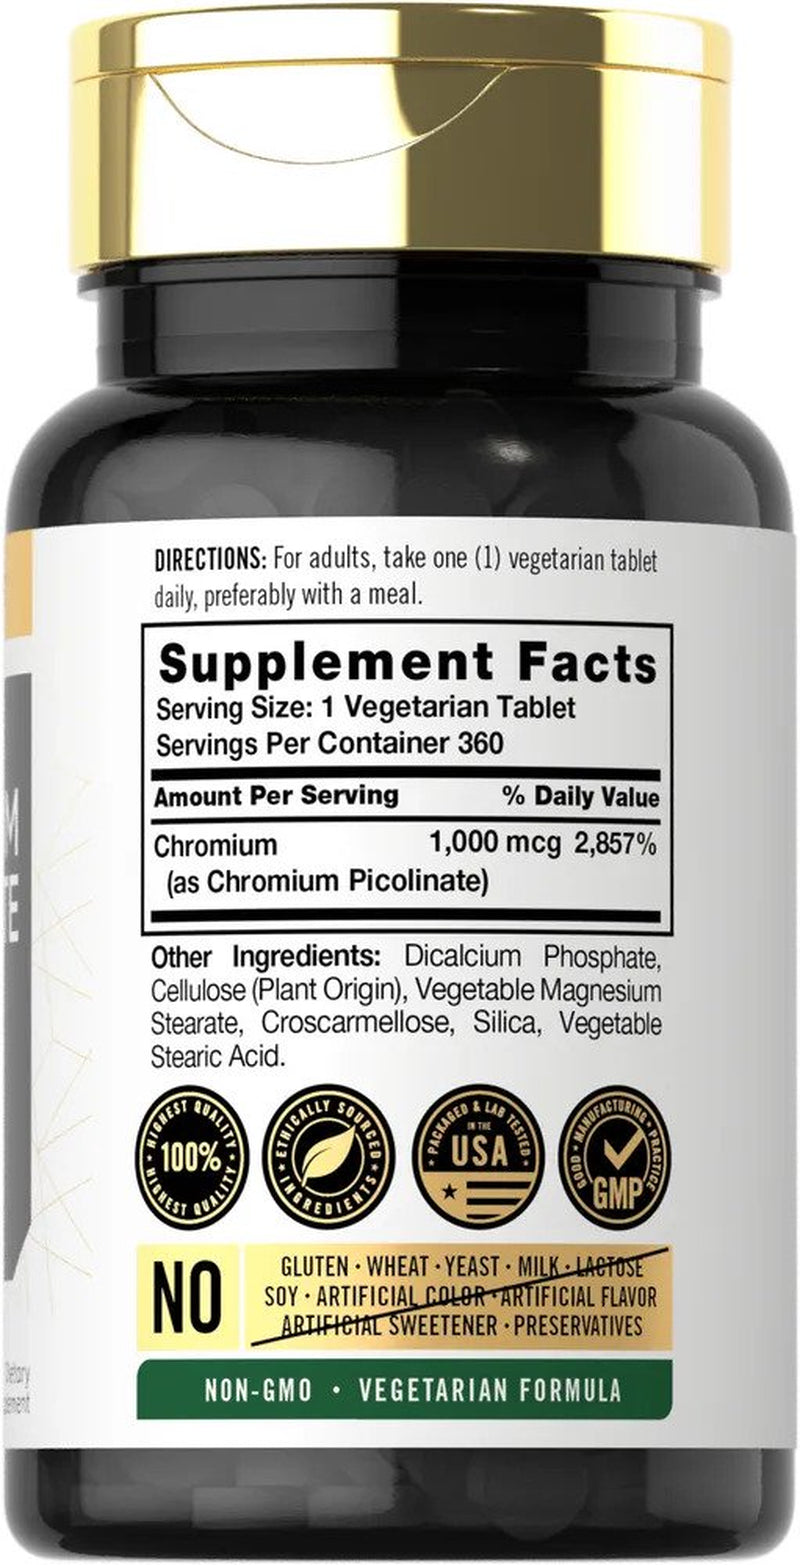 Ultra Chromium Picolinate 1000Mcg | 360 Tablets | by Carlyle